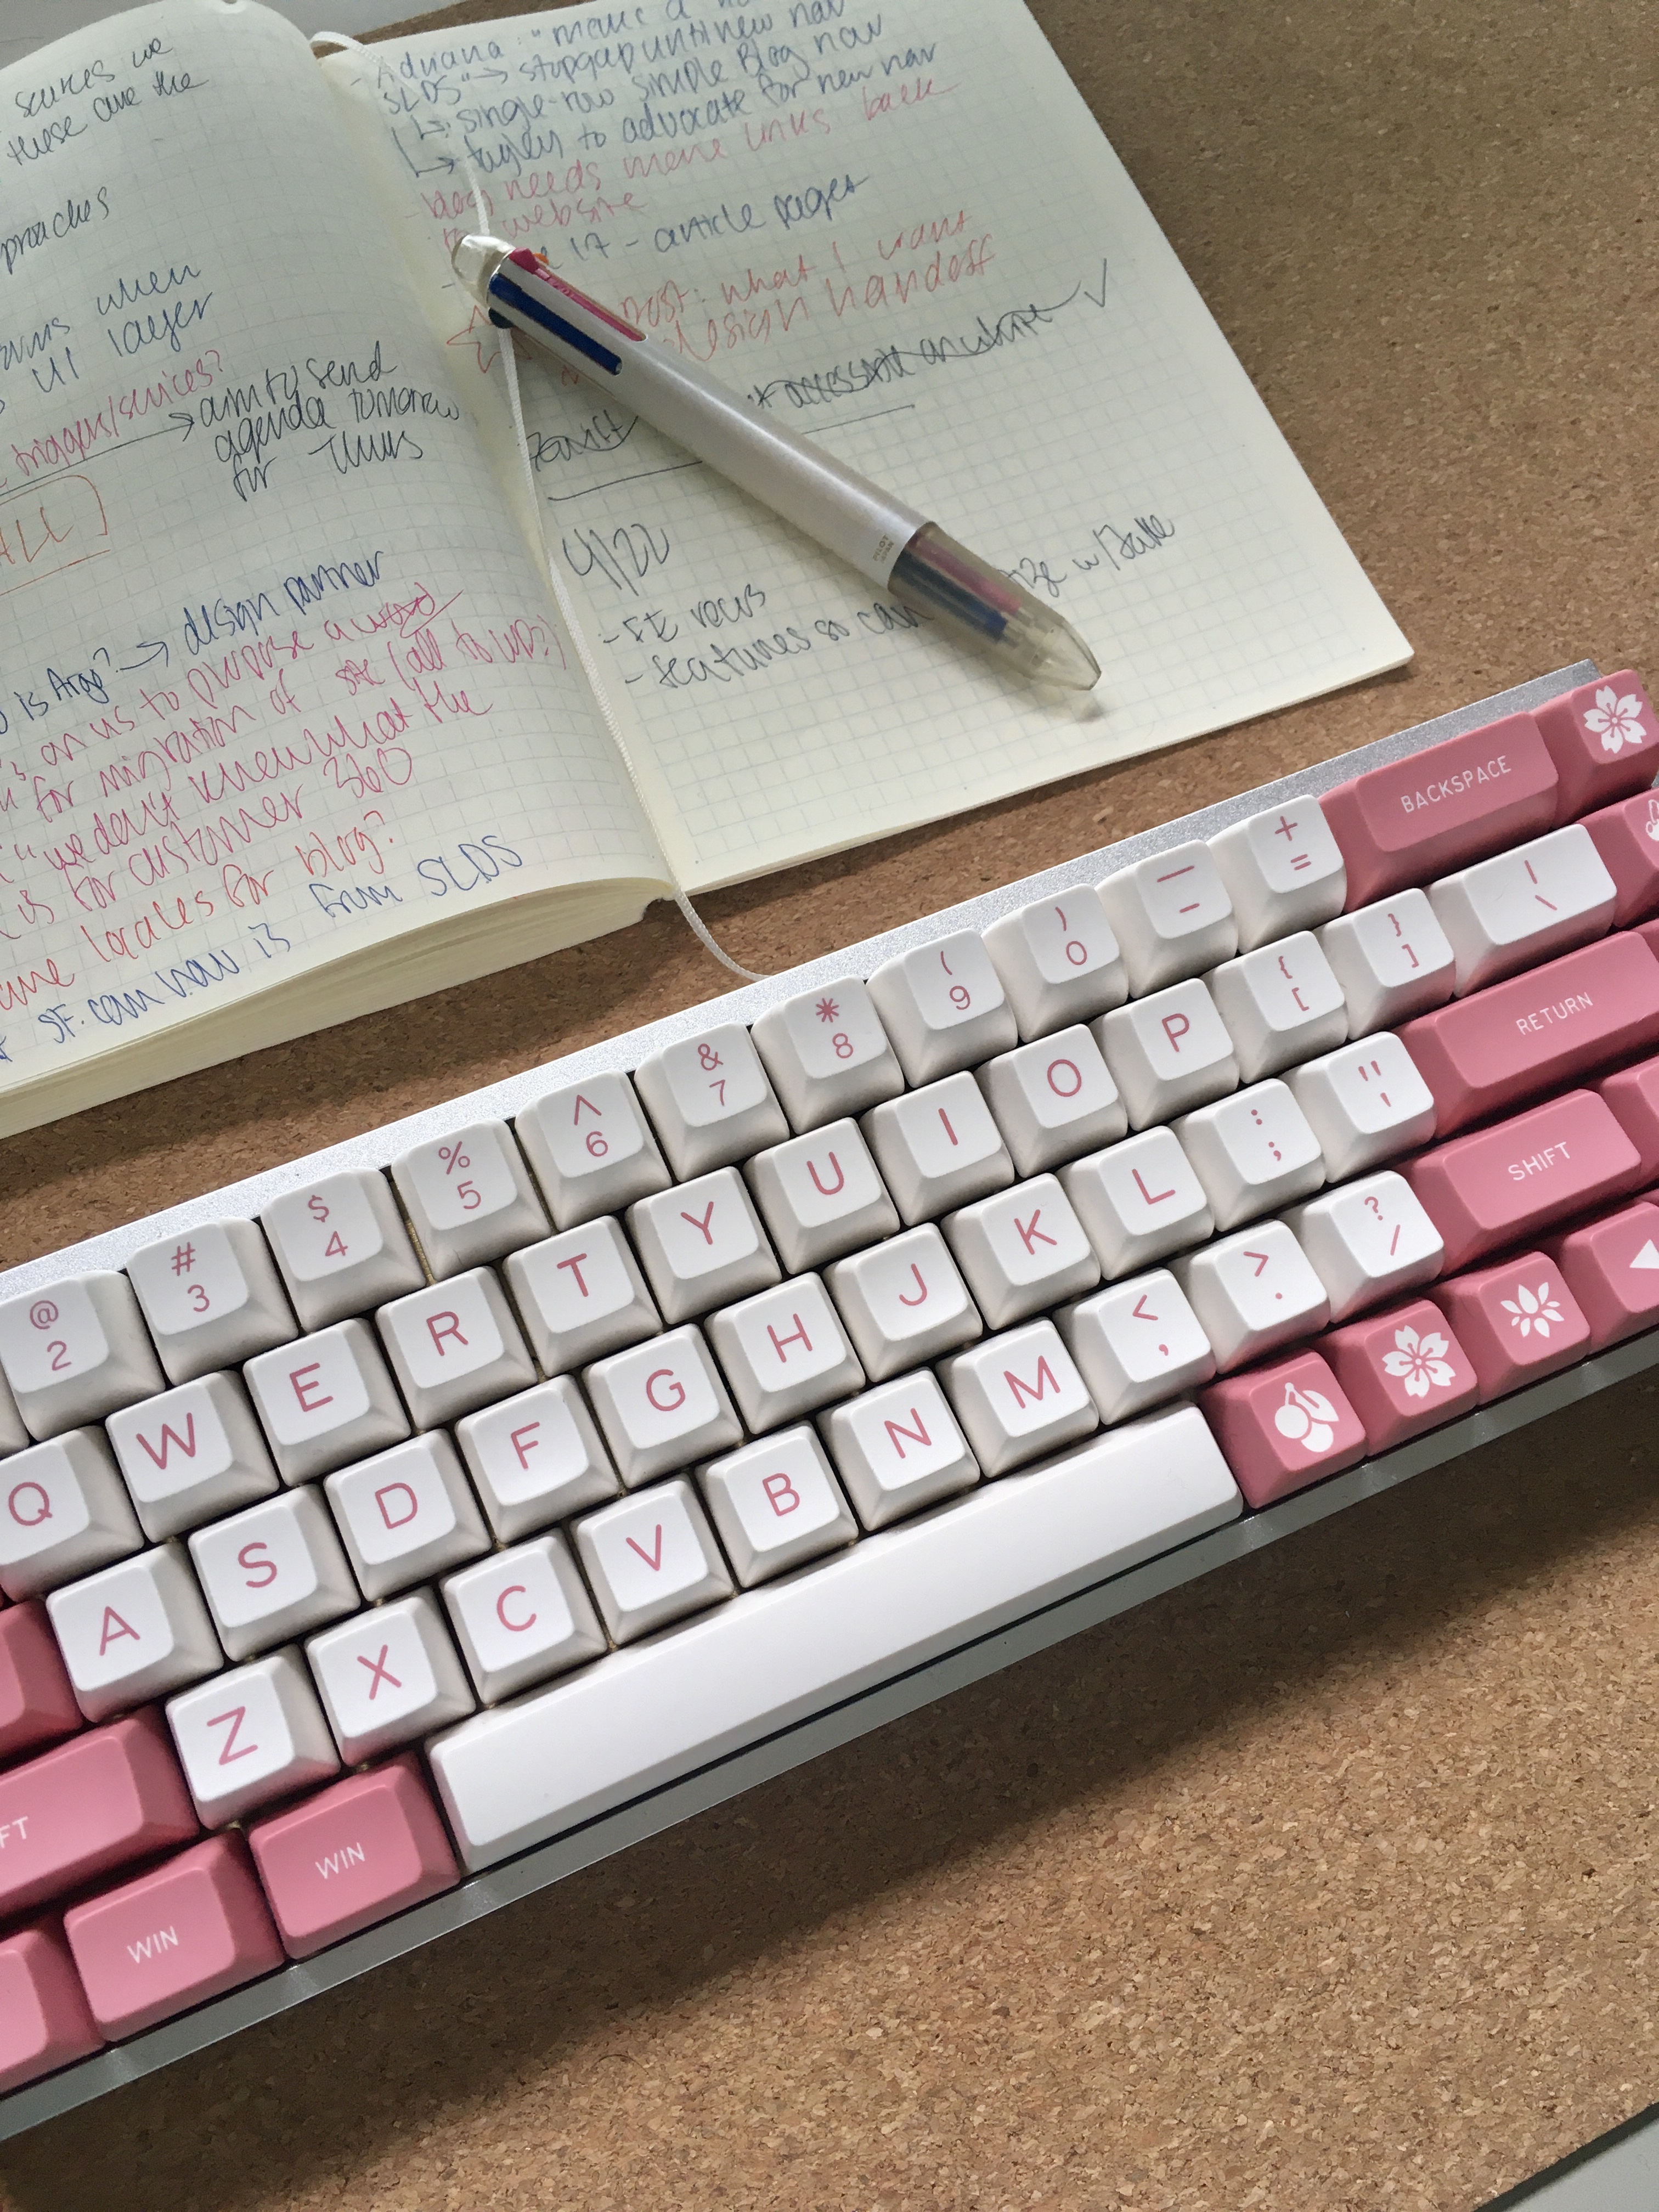 A pink-and-white keyboard.